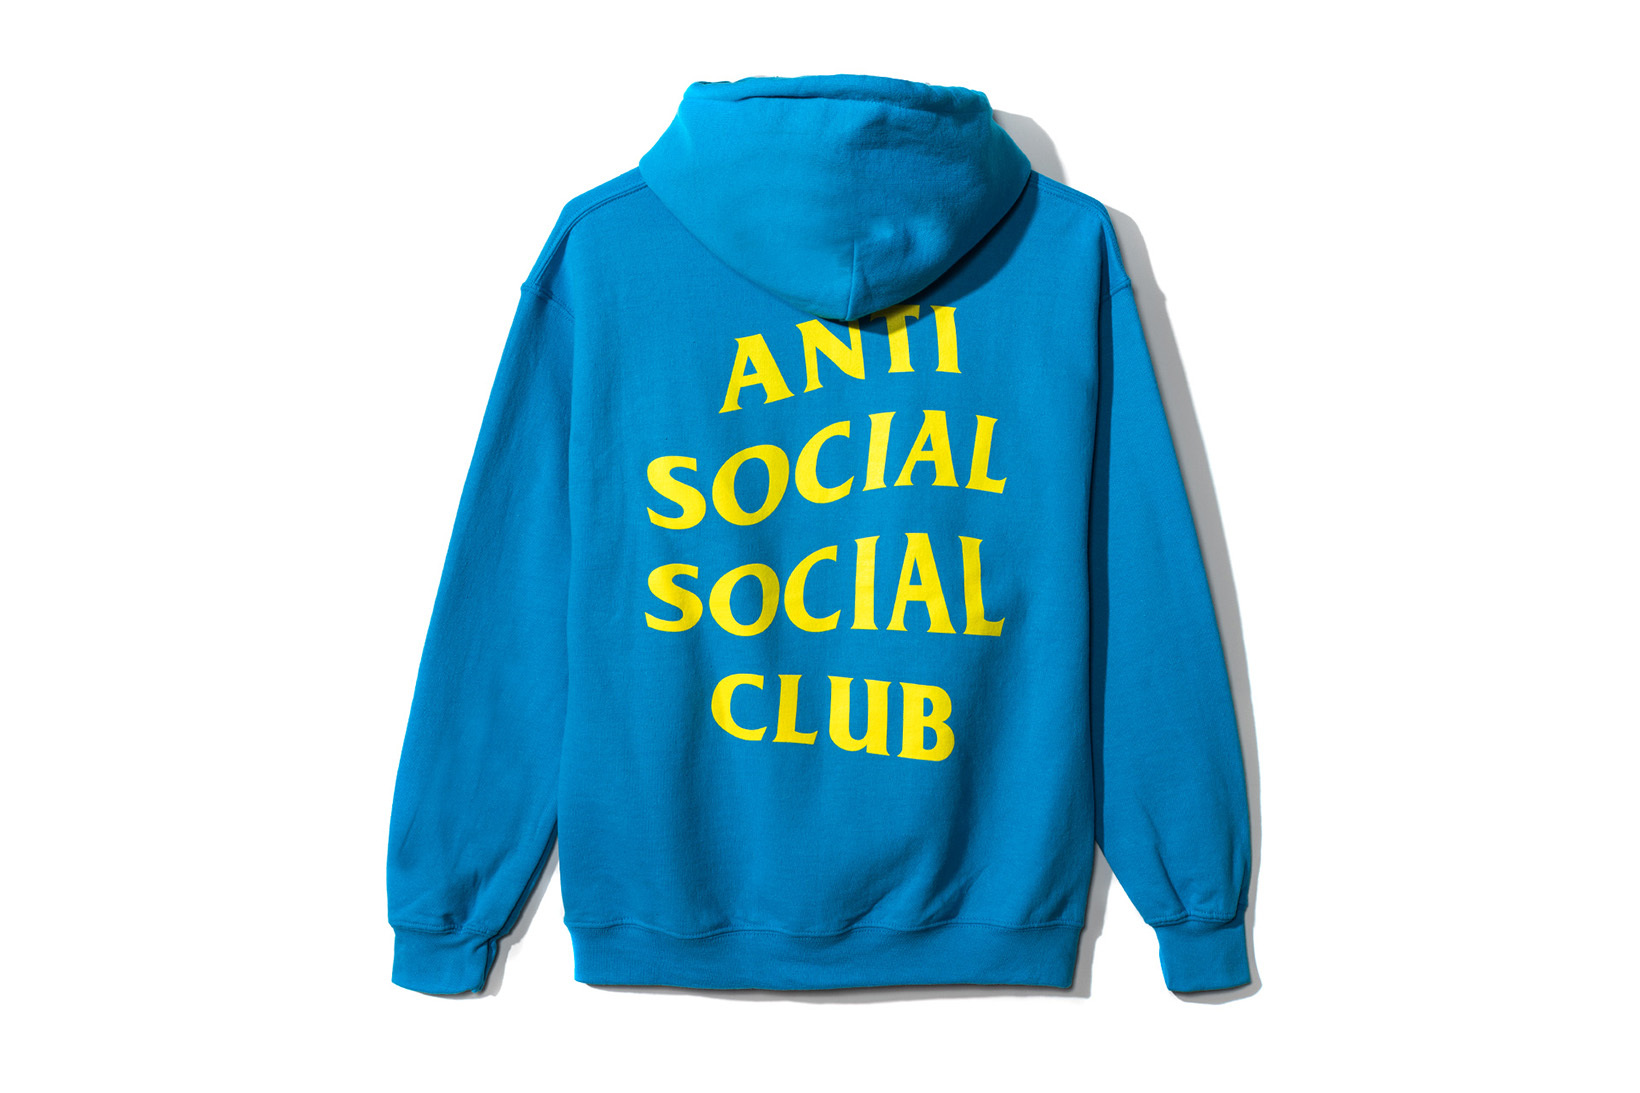 Anti Social Social Club SS17 Collection - Trapped Magazine1640 x 1093